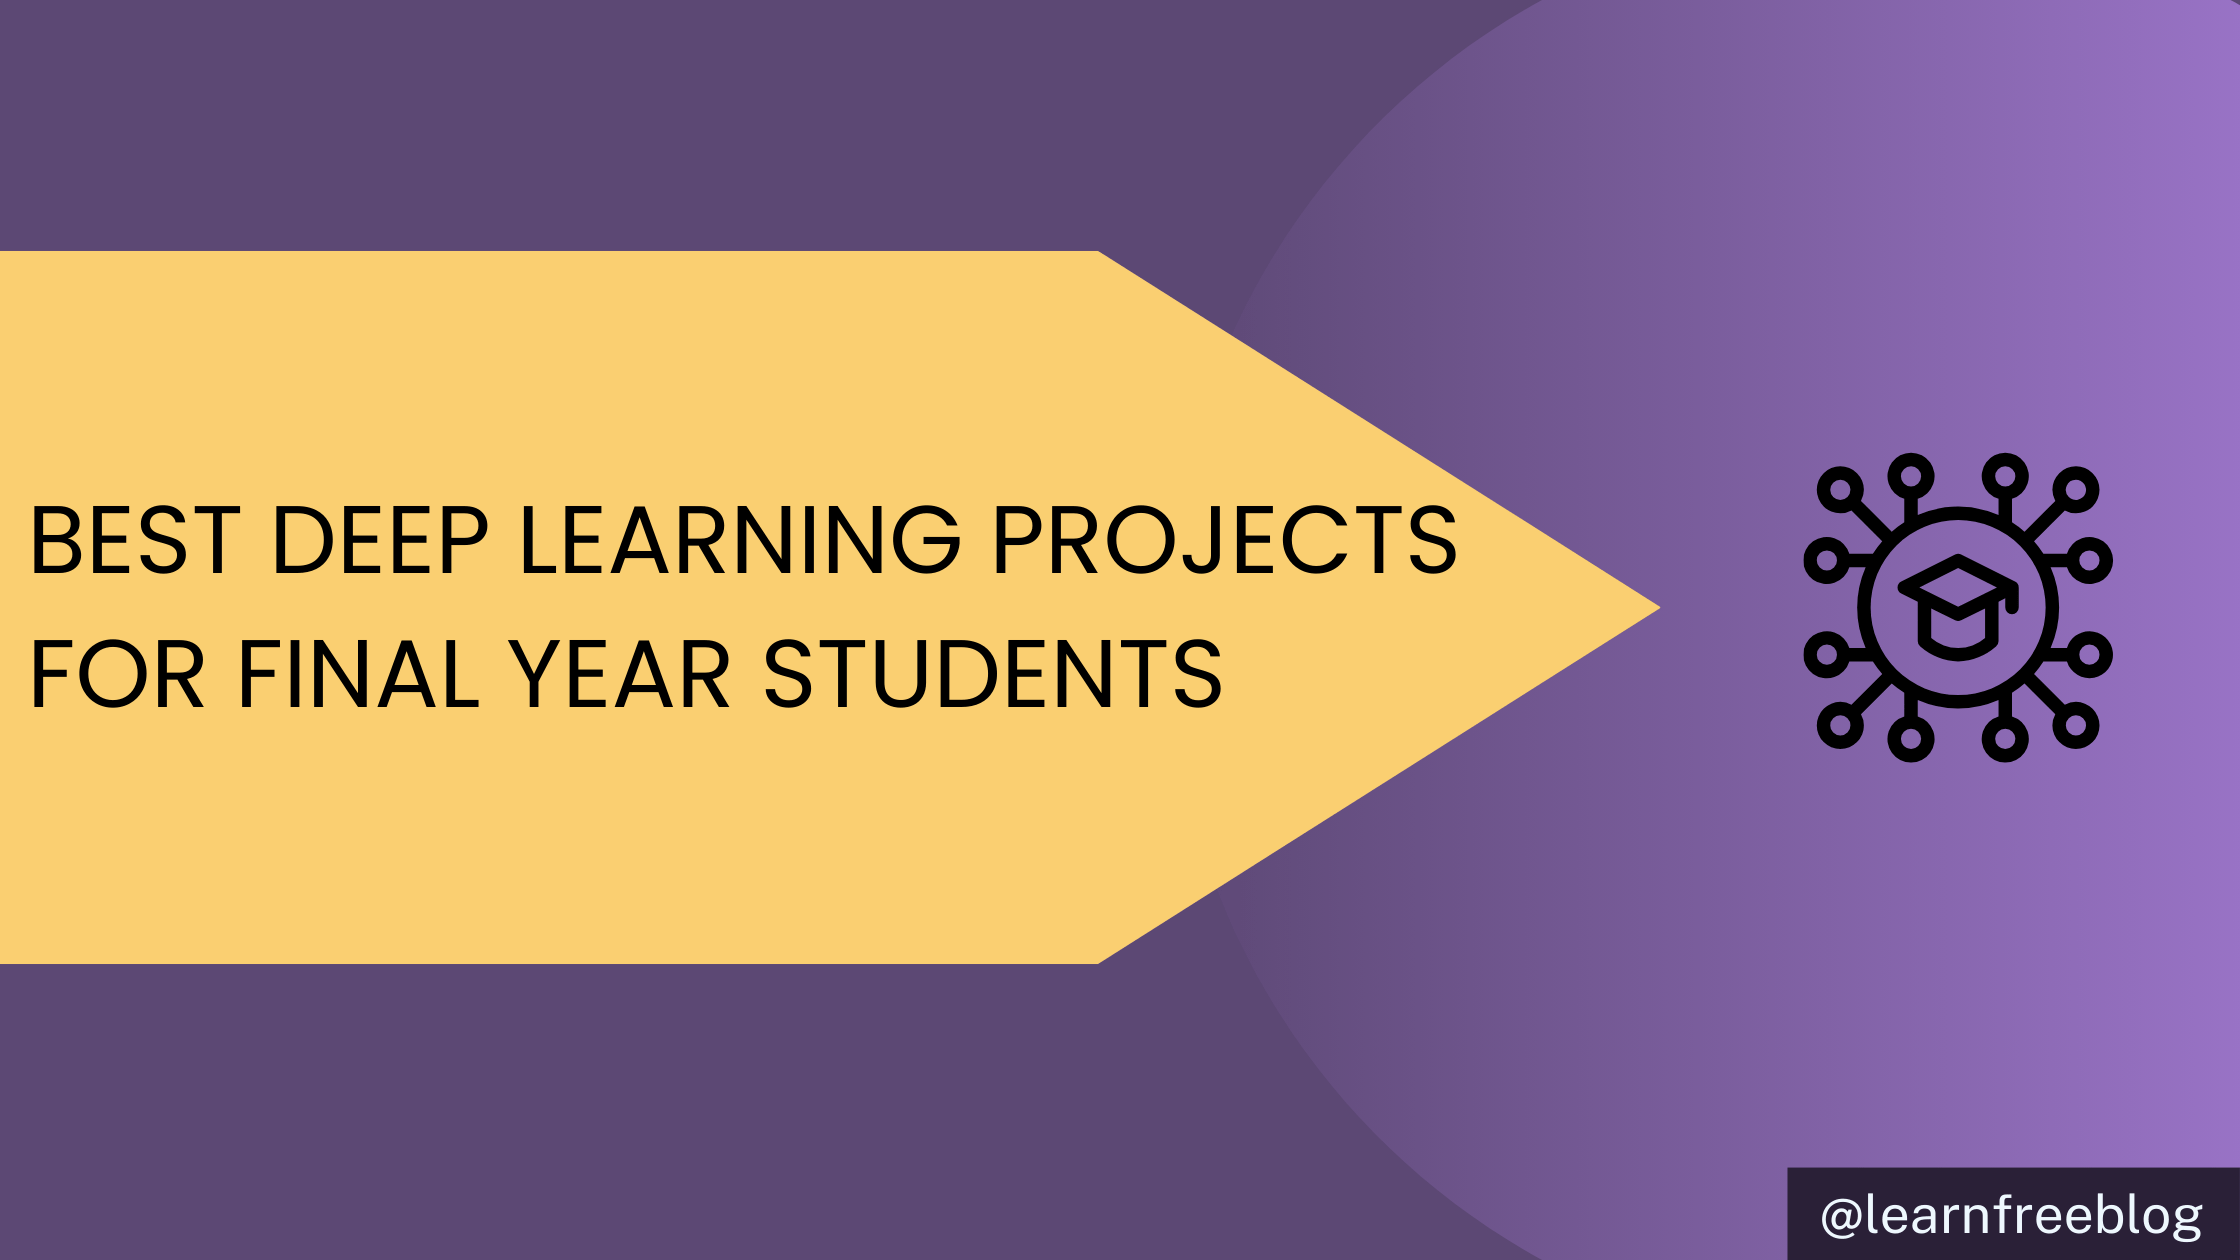 Best Deep Learning Projects for Final Year Students